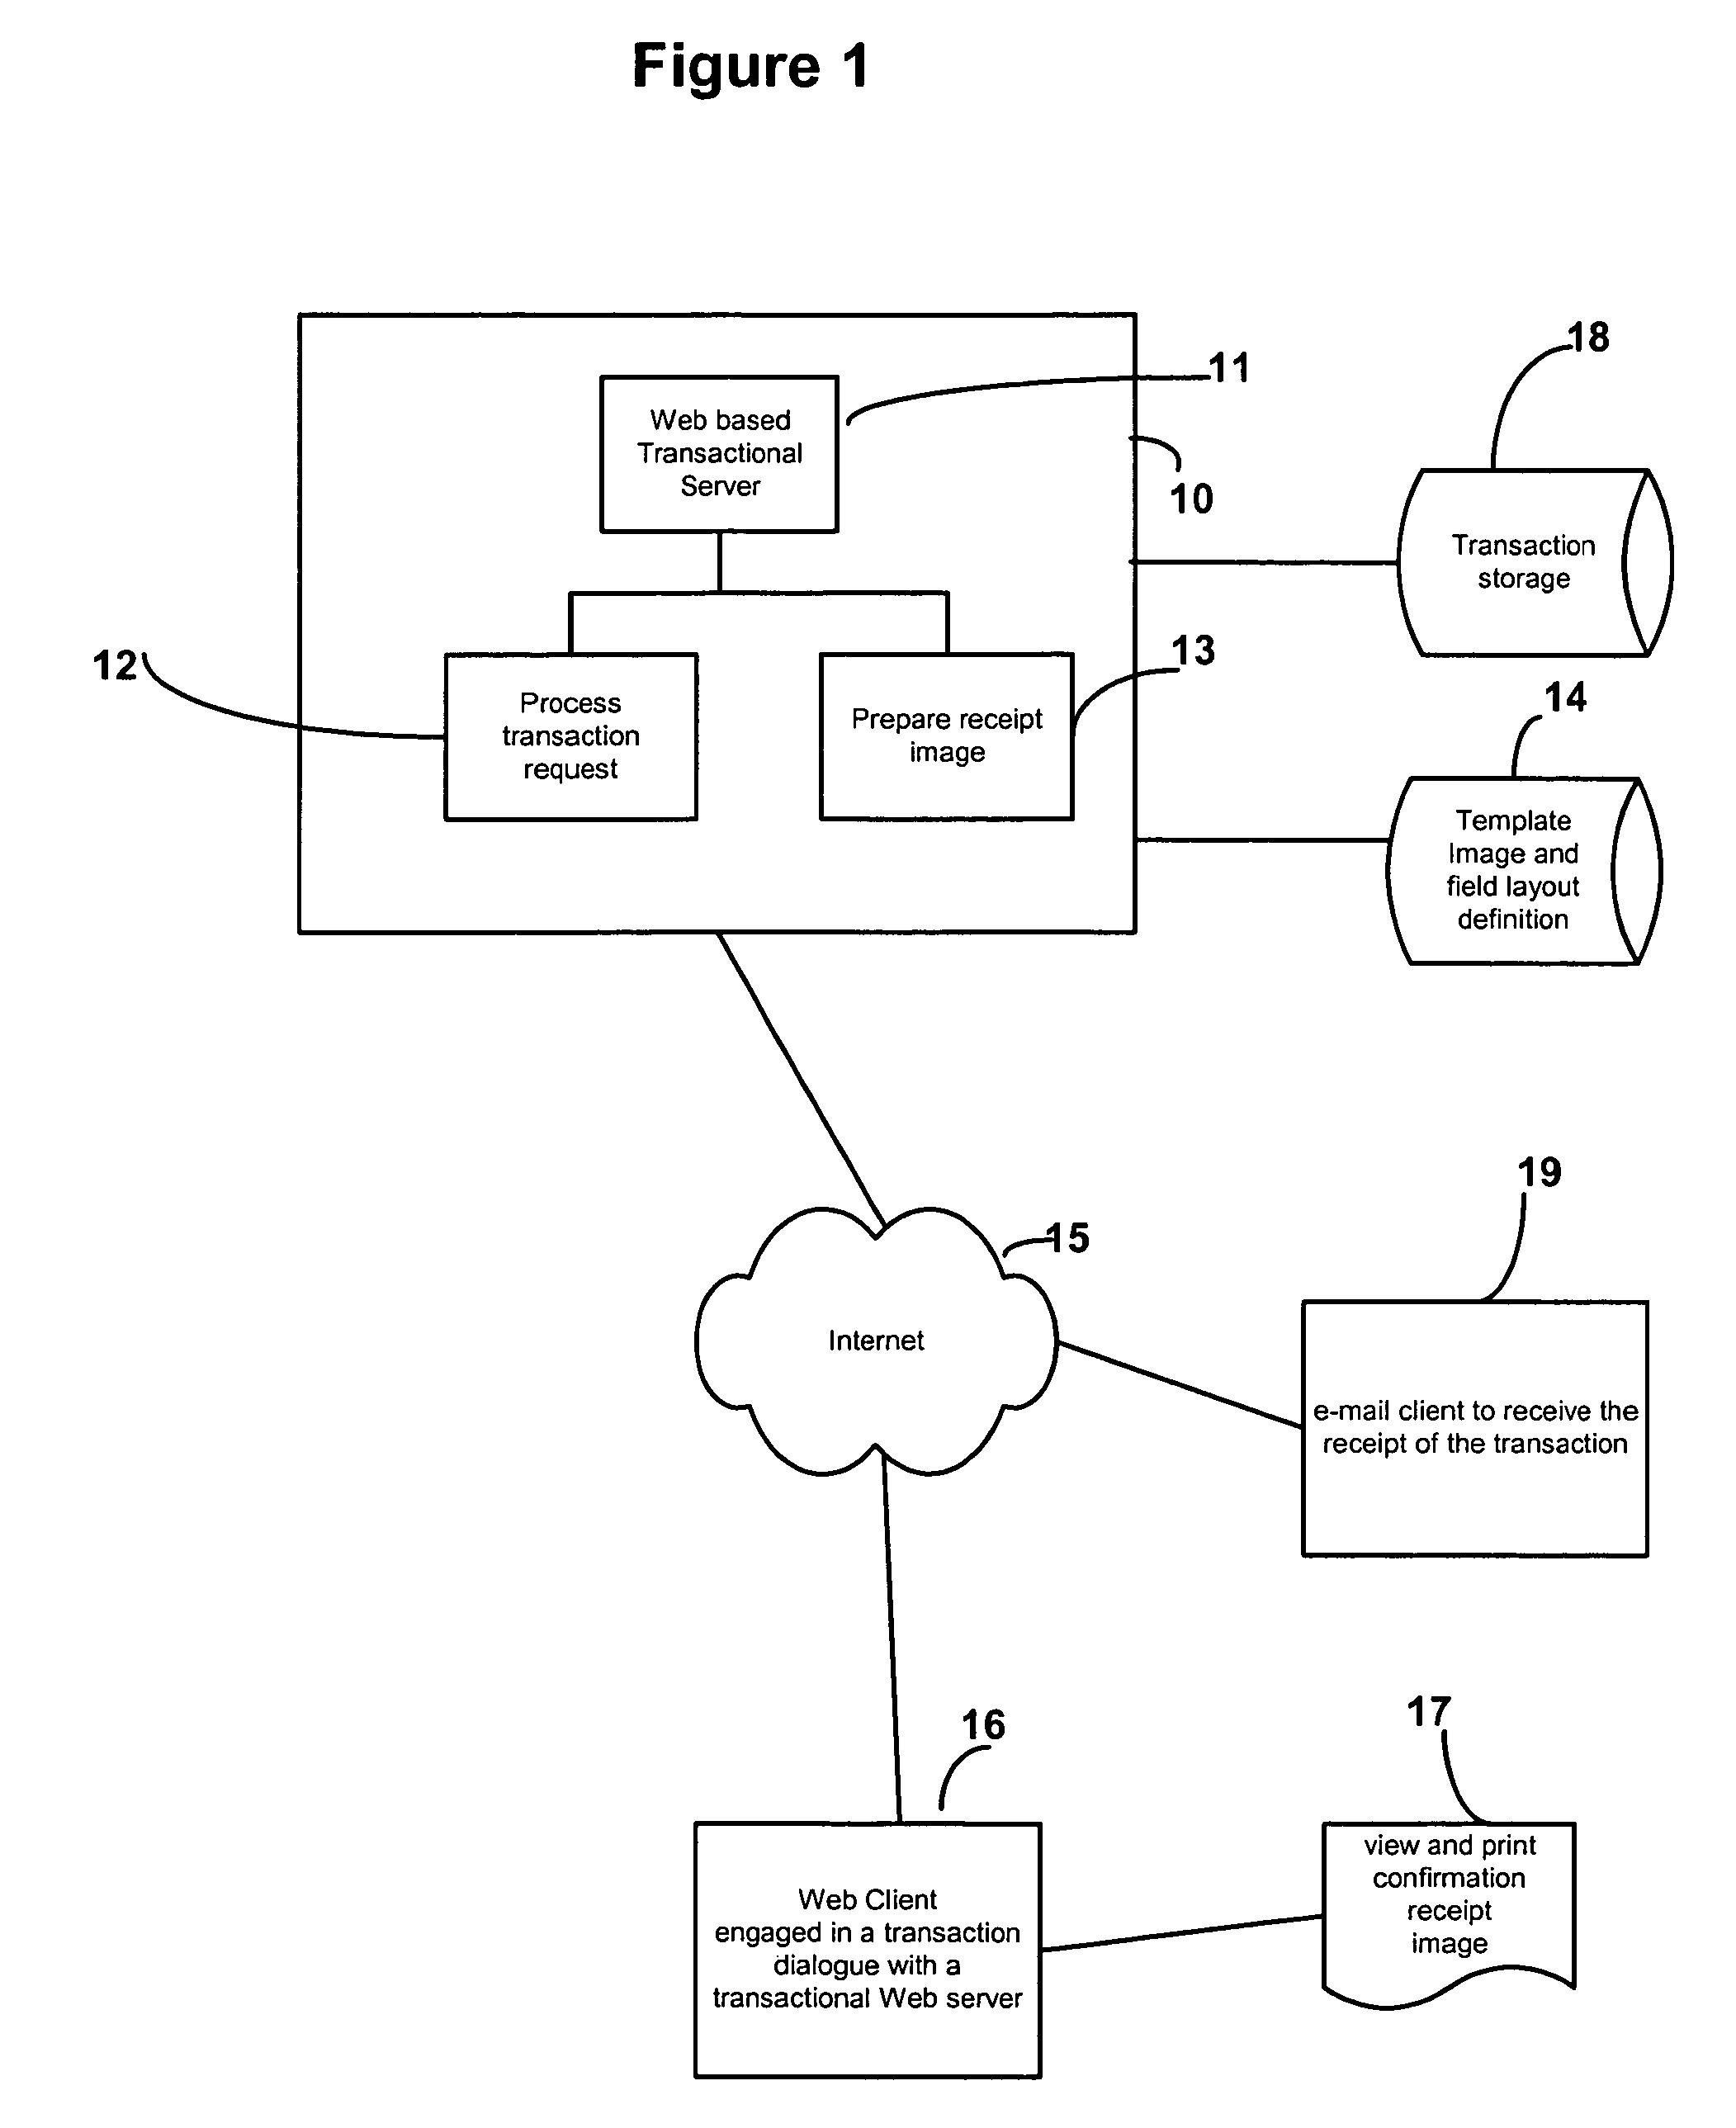 Method and procedure in creating a server side digital image file as receipt for web transactions